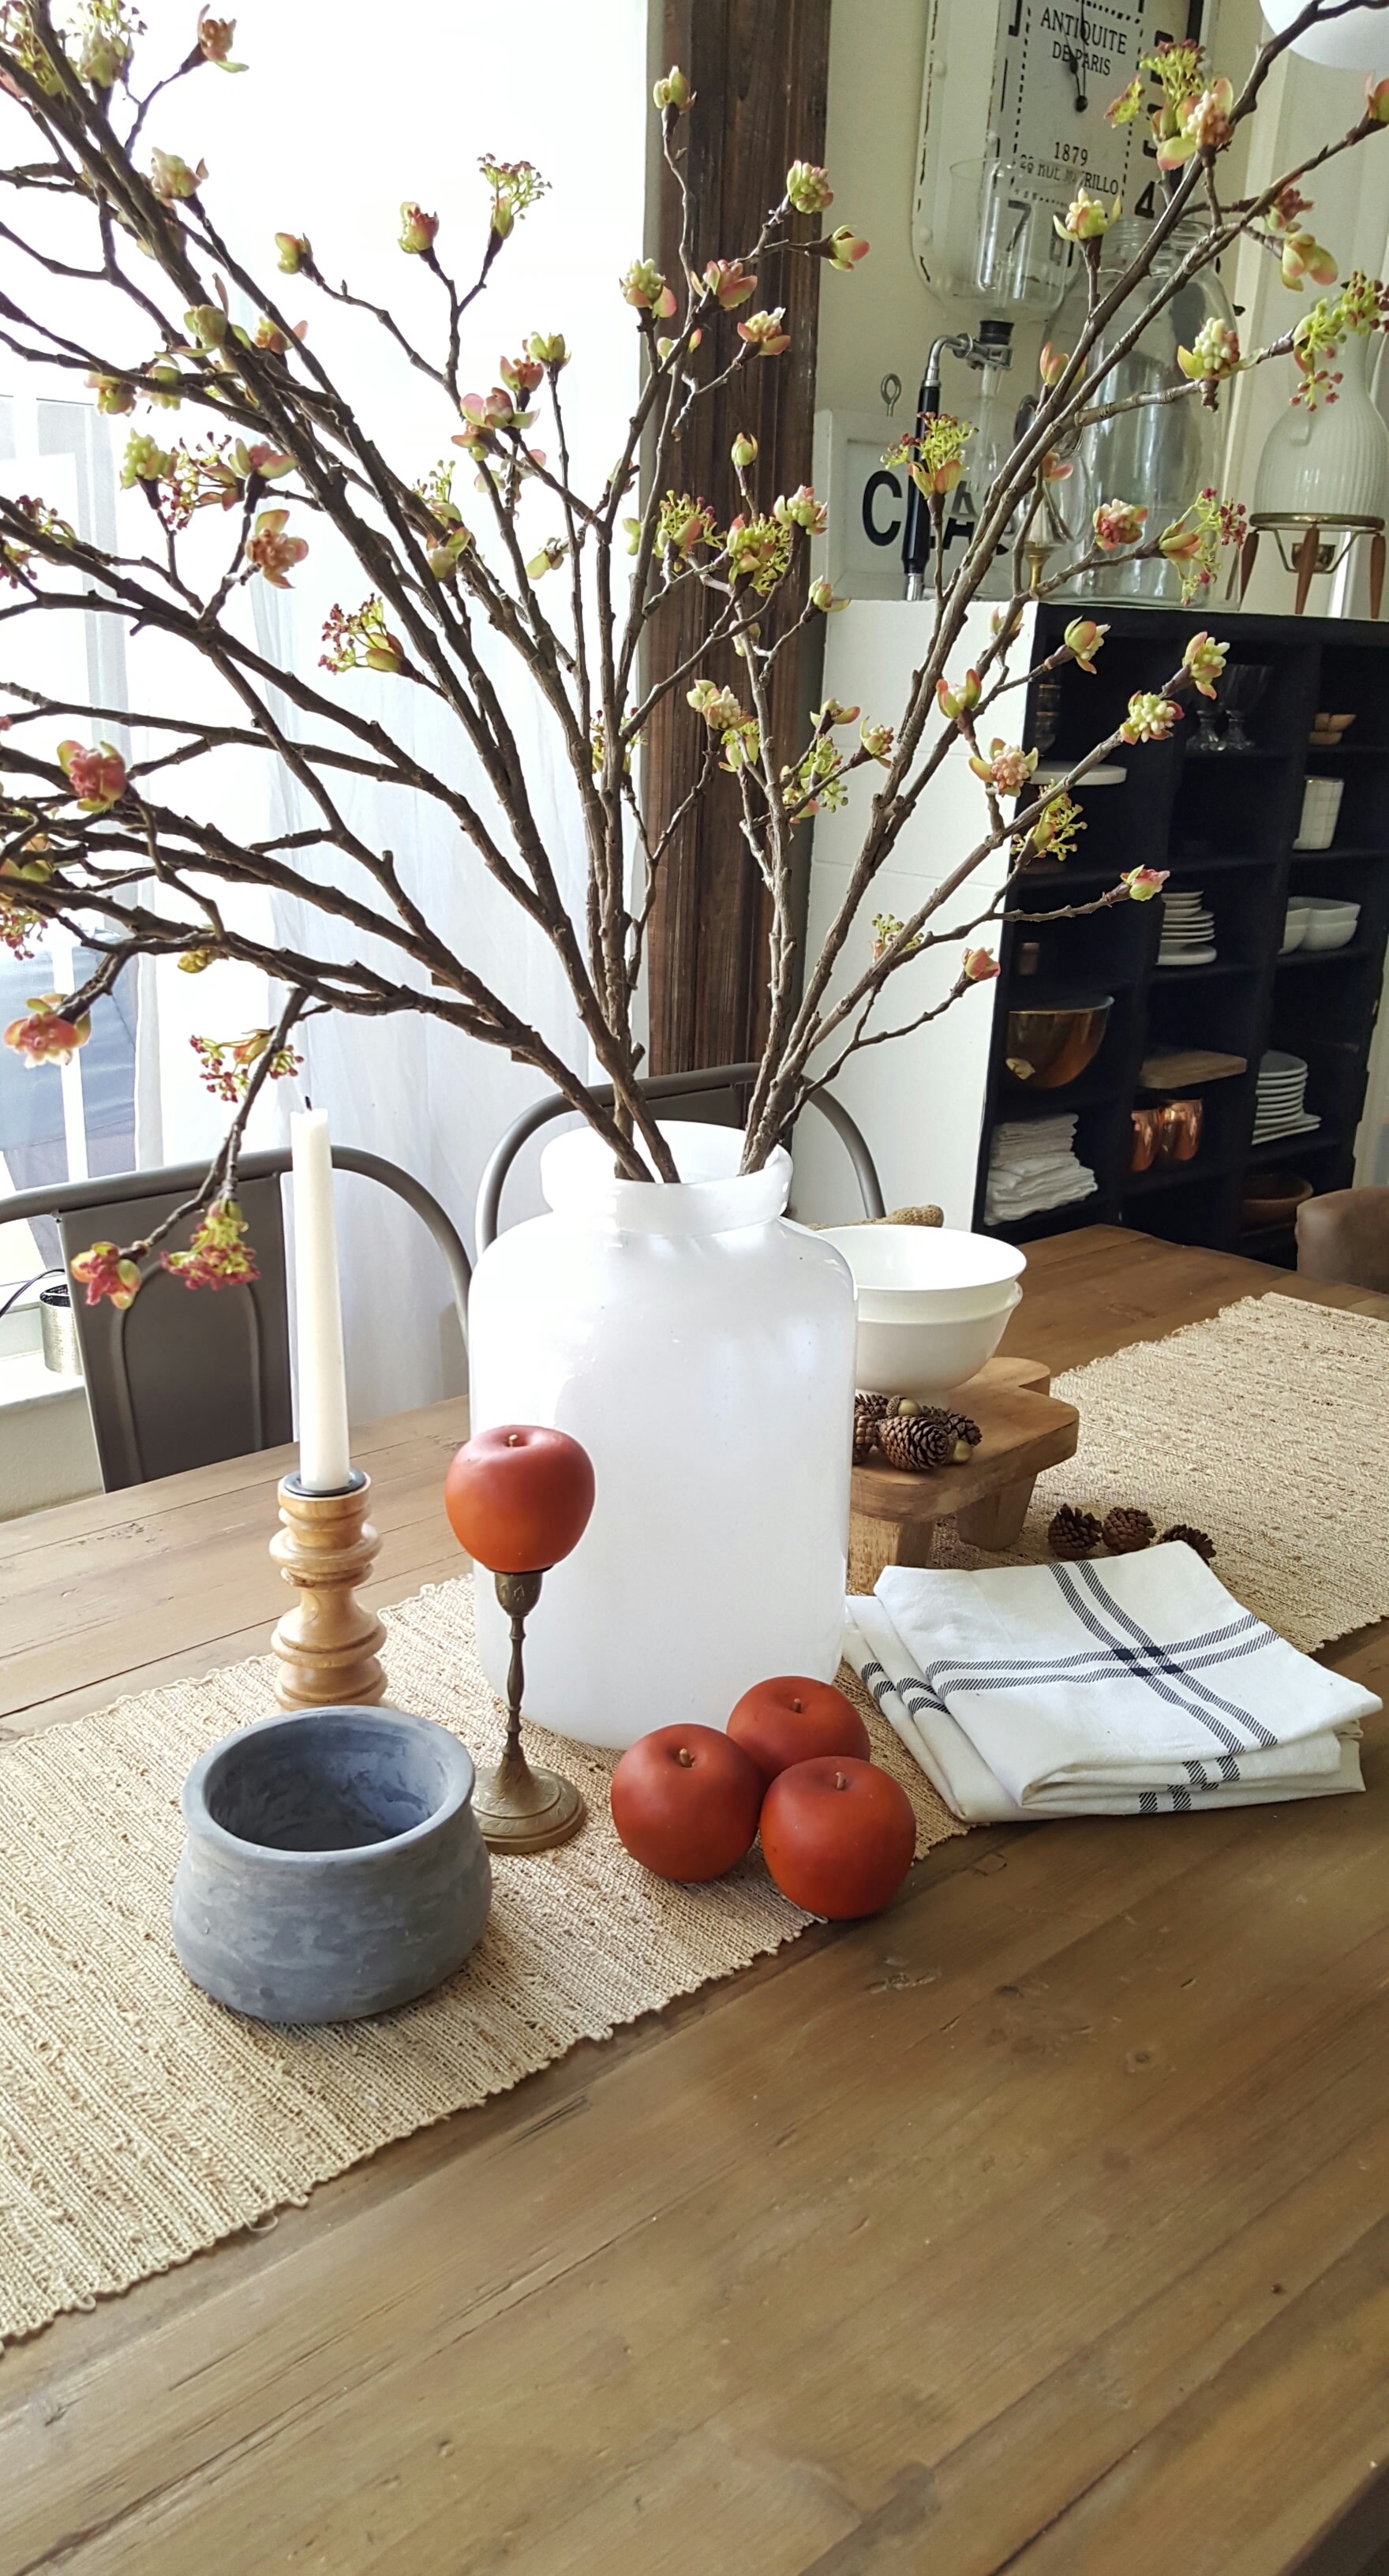 Shop the house design challenge Fall dining table decor white wood apples and blossoms